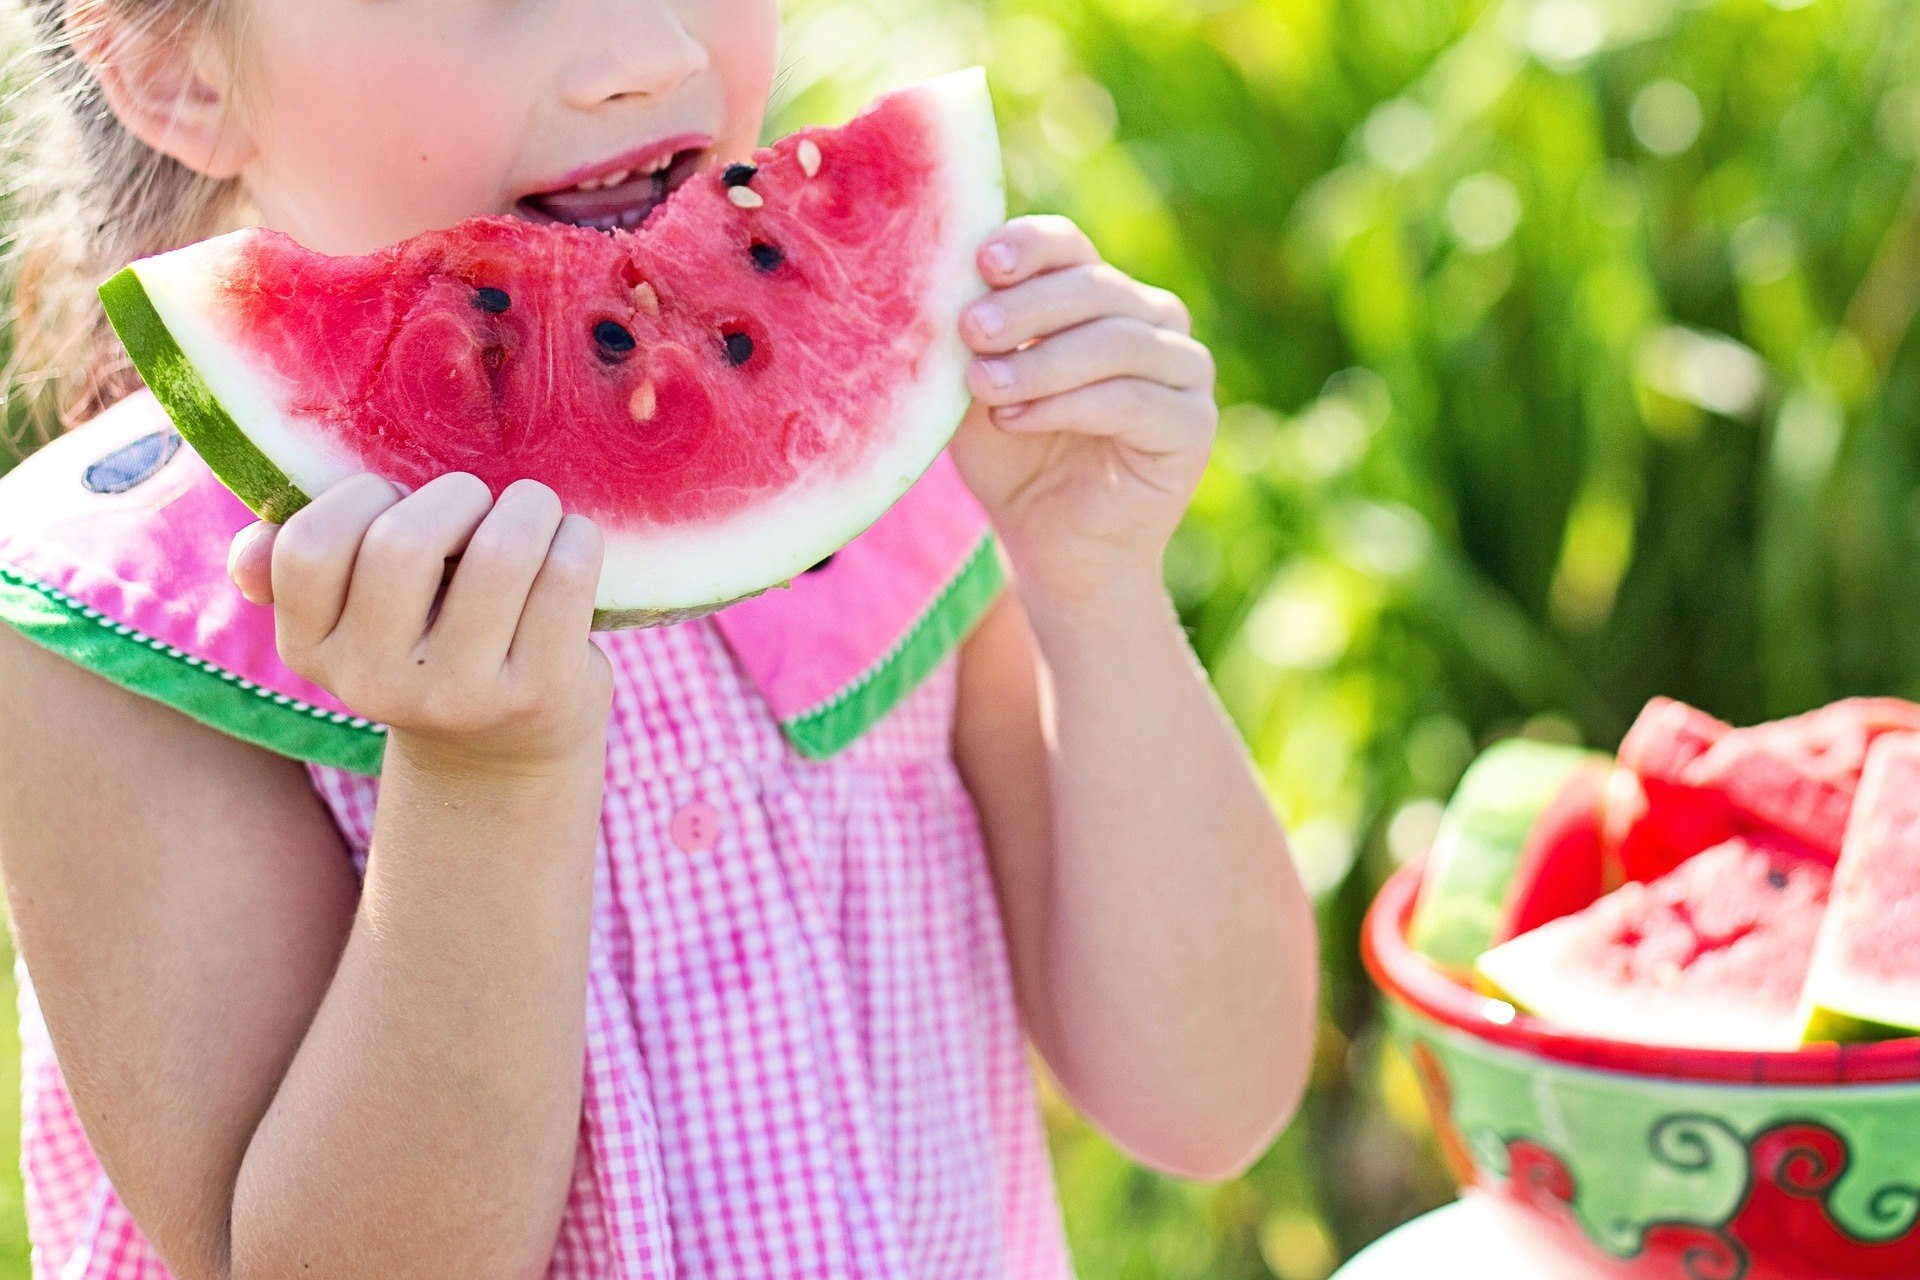 girl in a pink dress eating a watermelon slice.